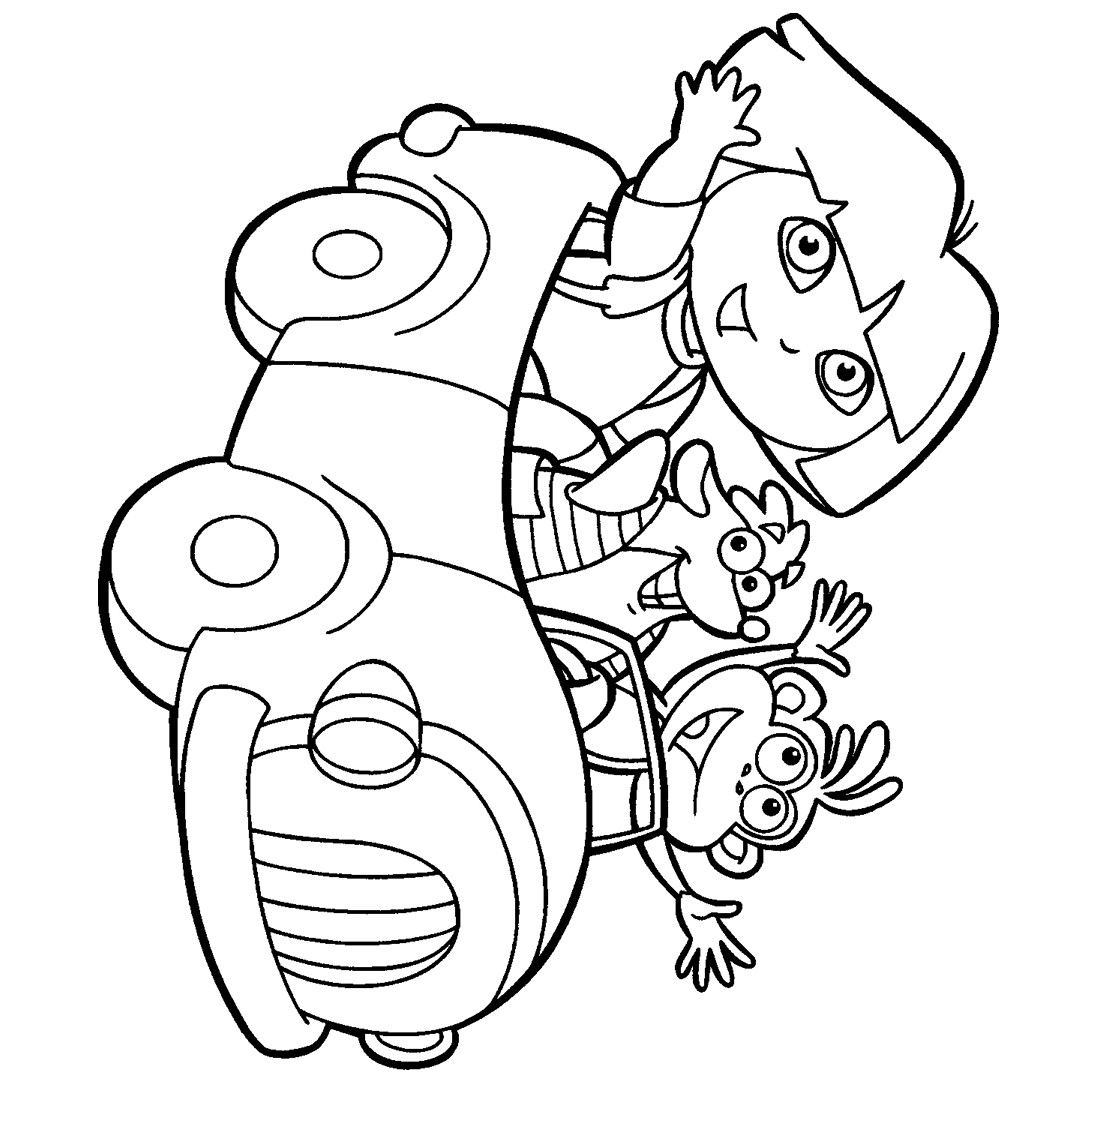 Coloring Page For Kids
 Printable coloring pages for kids